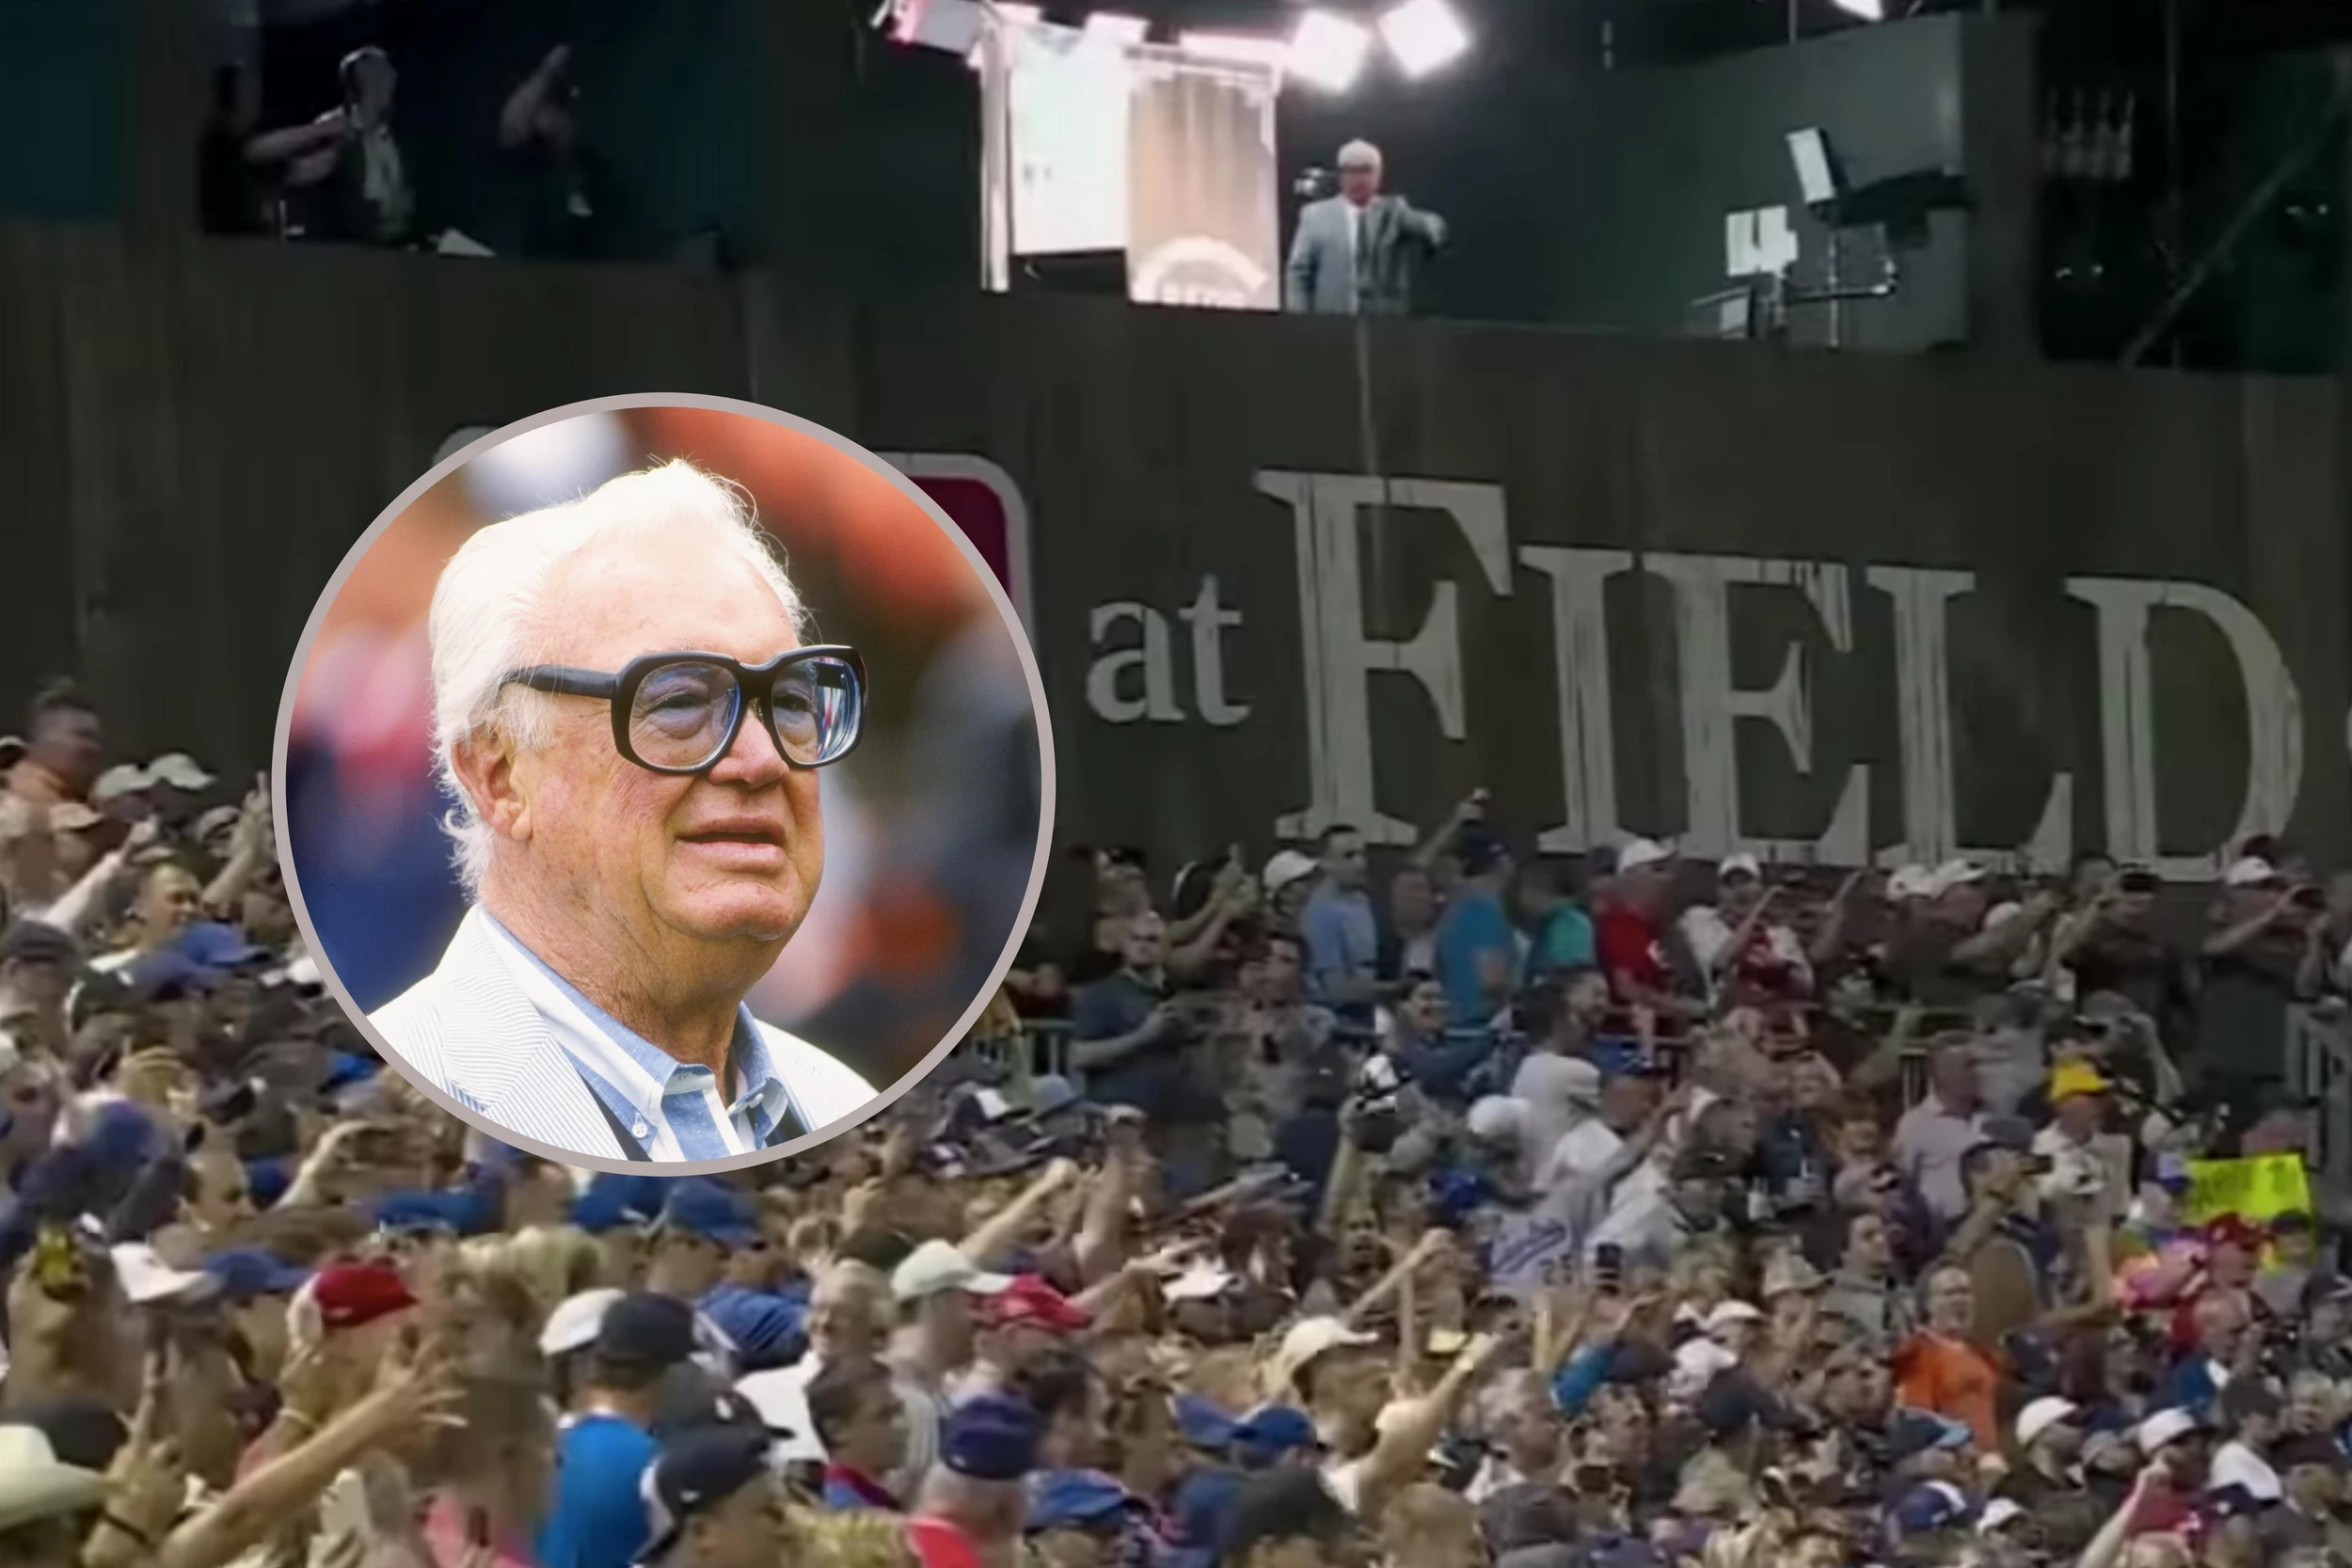 Chicago, IL - Harry Caray: Faces In His Pants